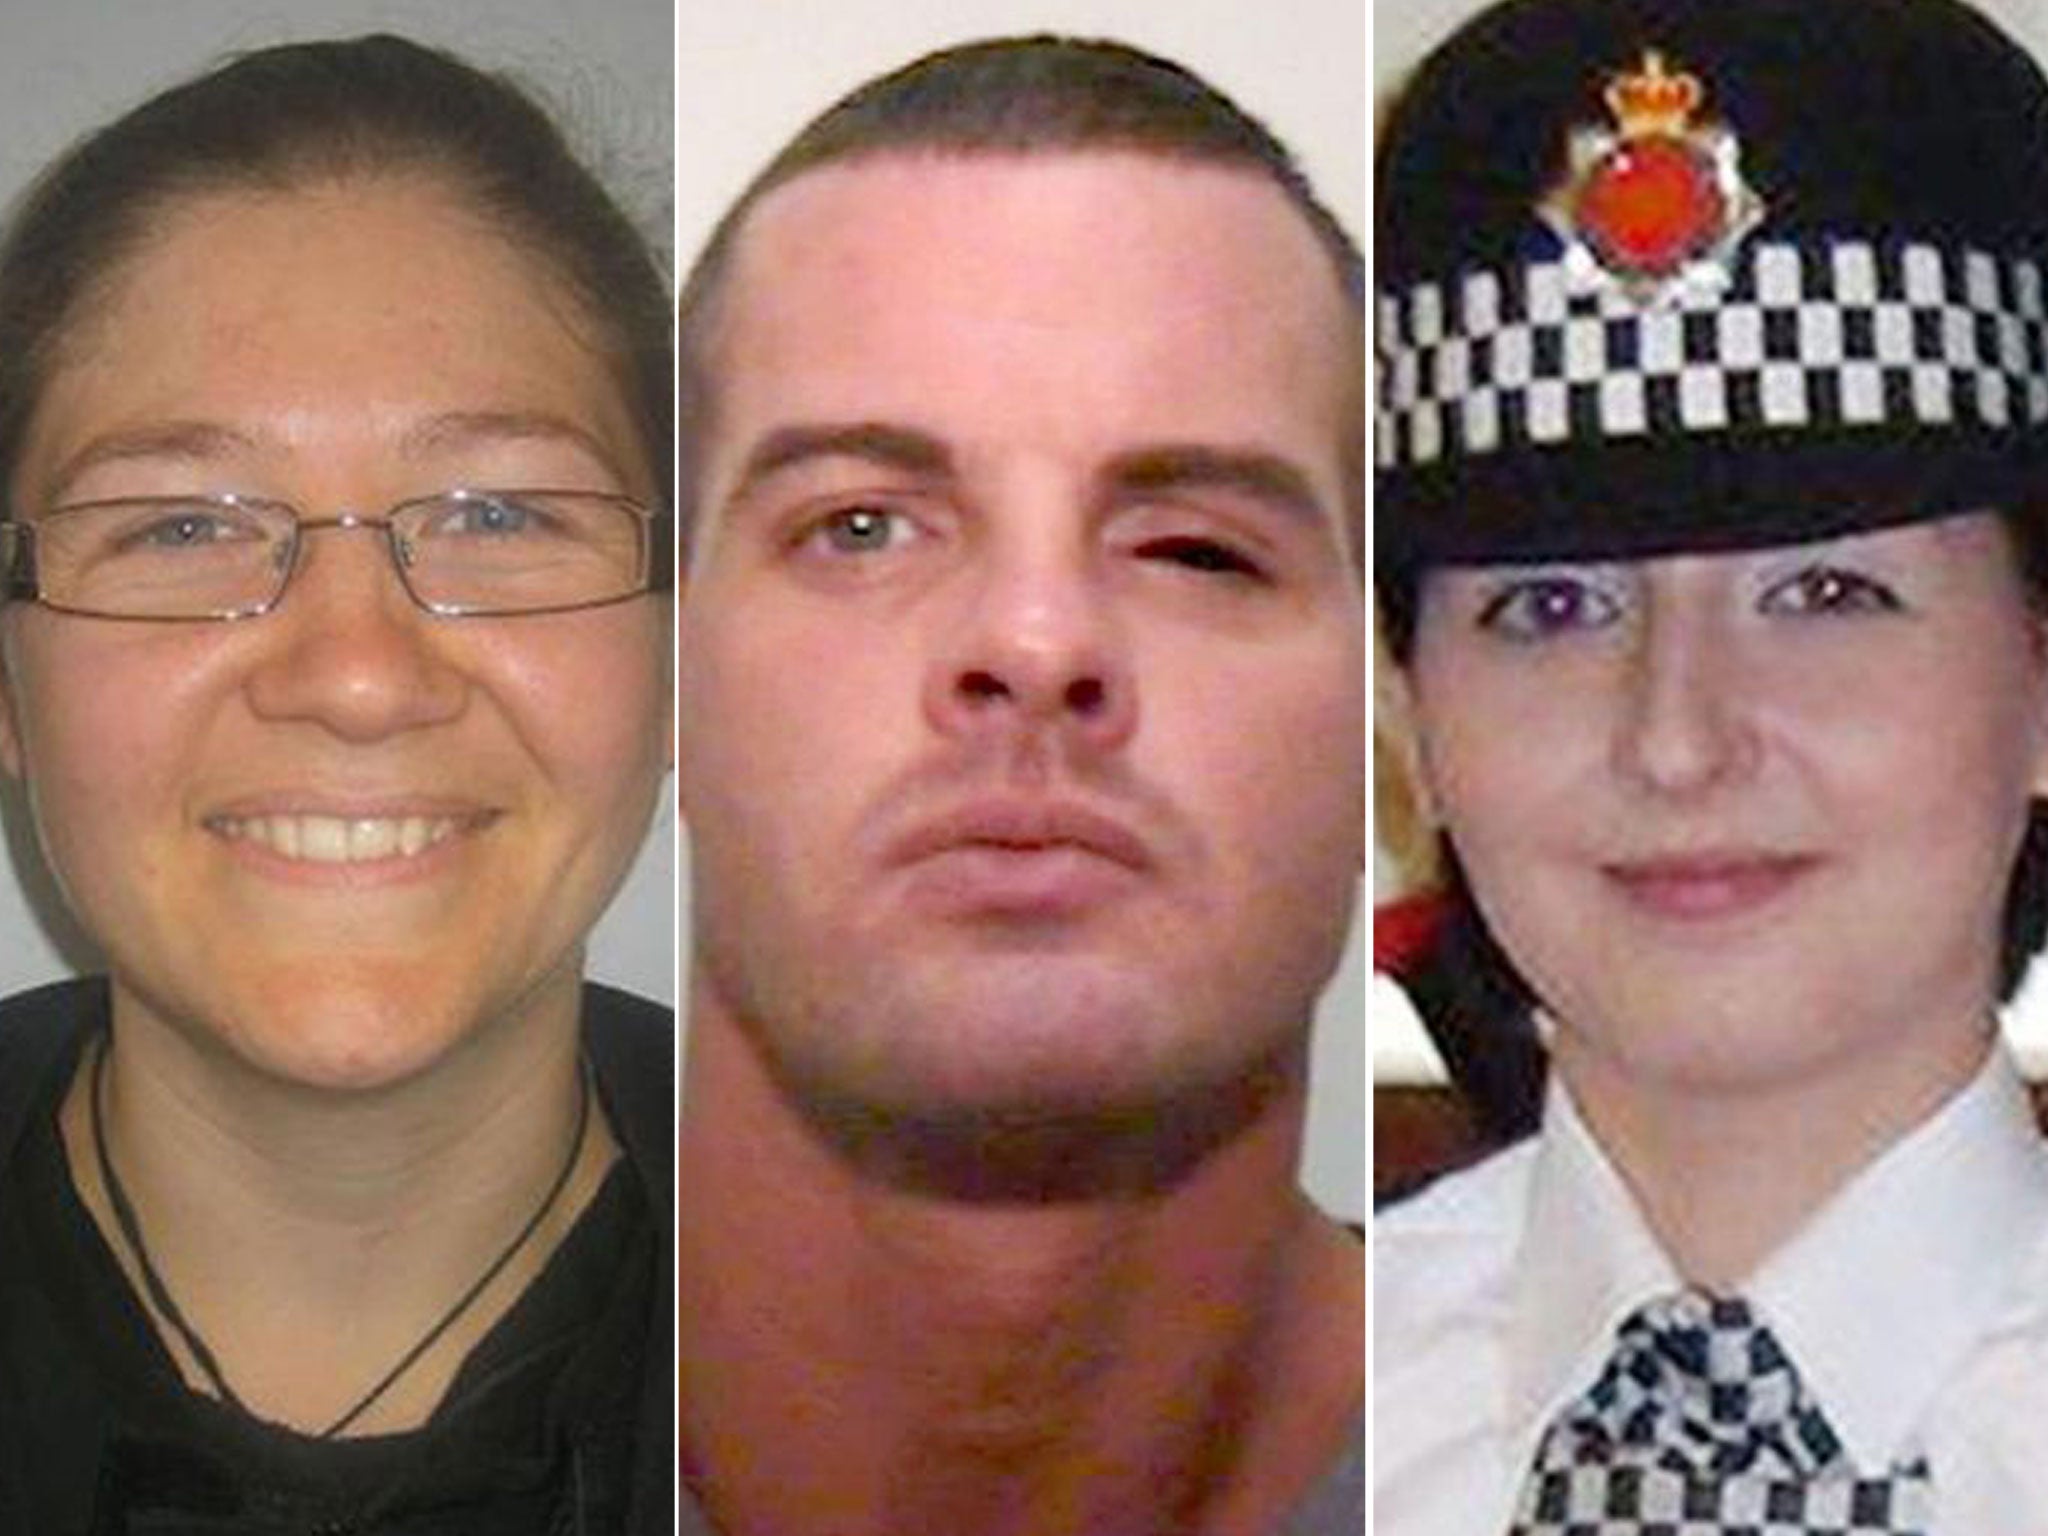 Dale Cregan (centre) is charged with killing PCs Nicola Hughes, 23, (right) and Fiona Bone, 32, (left) in a gun and grenade attack